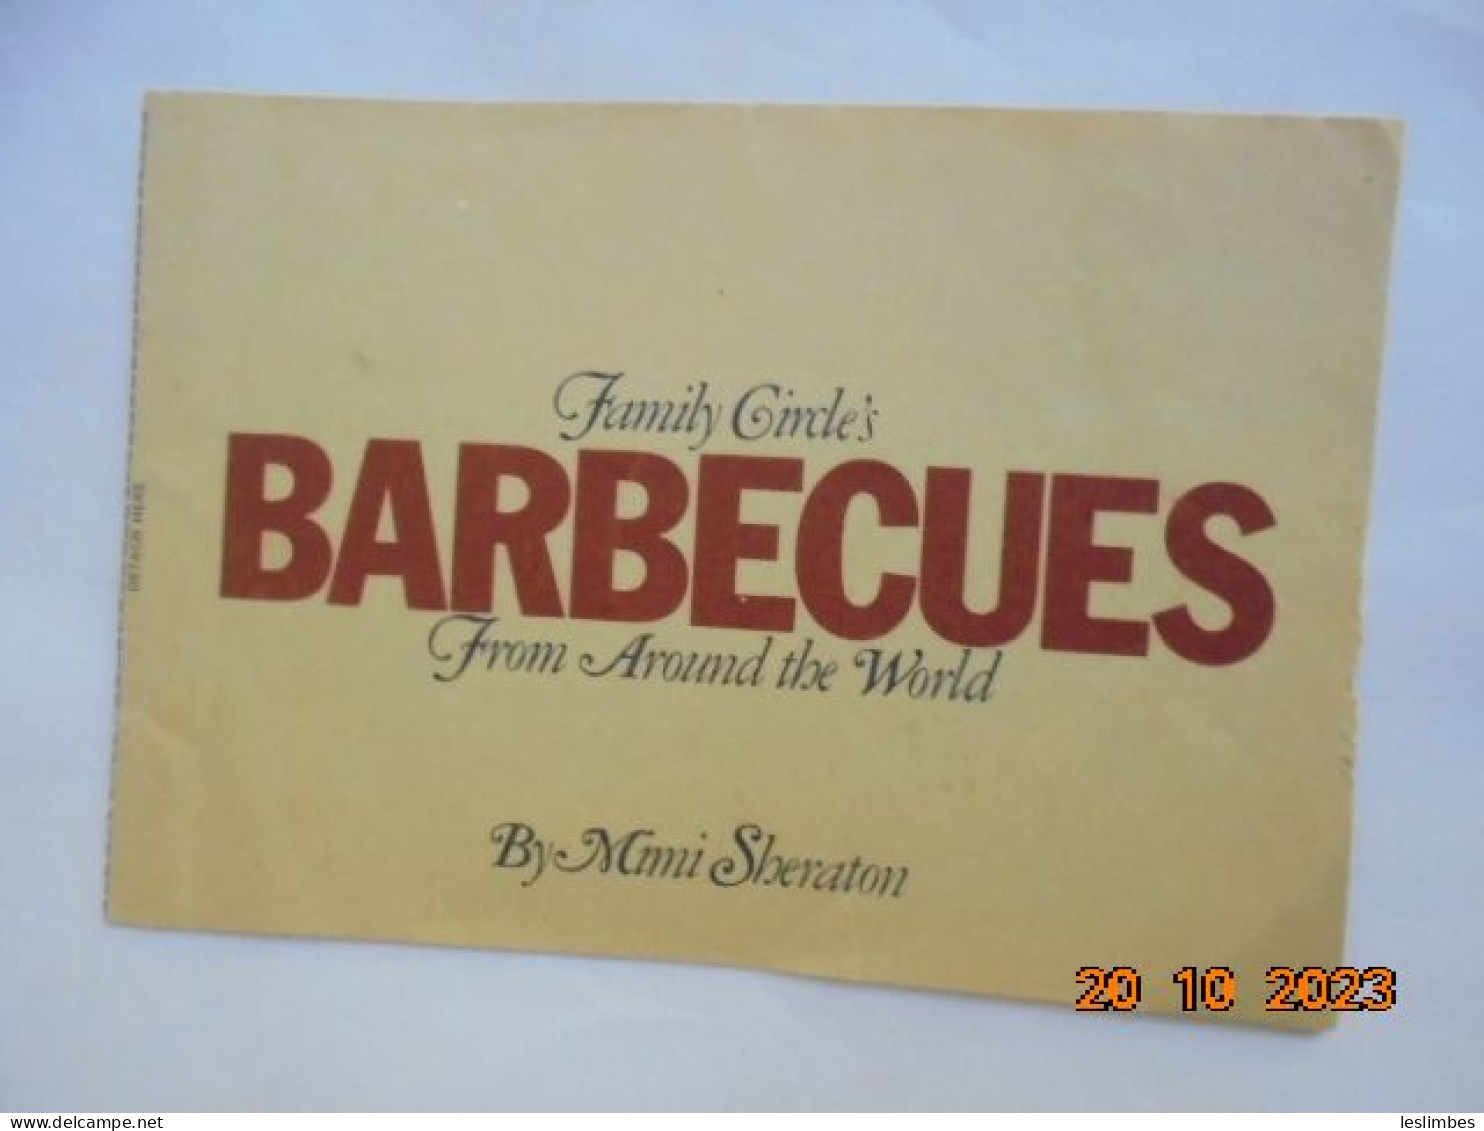 Family Circle's Barbecues From Around The World - Mimi Sheraton, 1973 - Americana